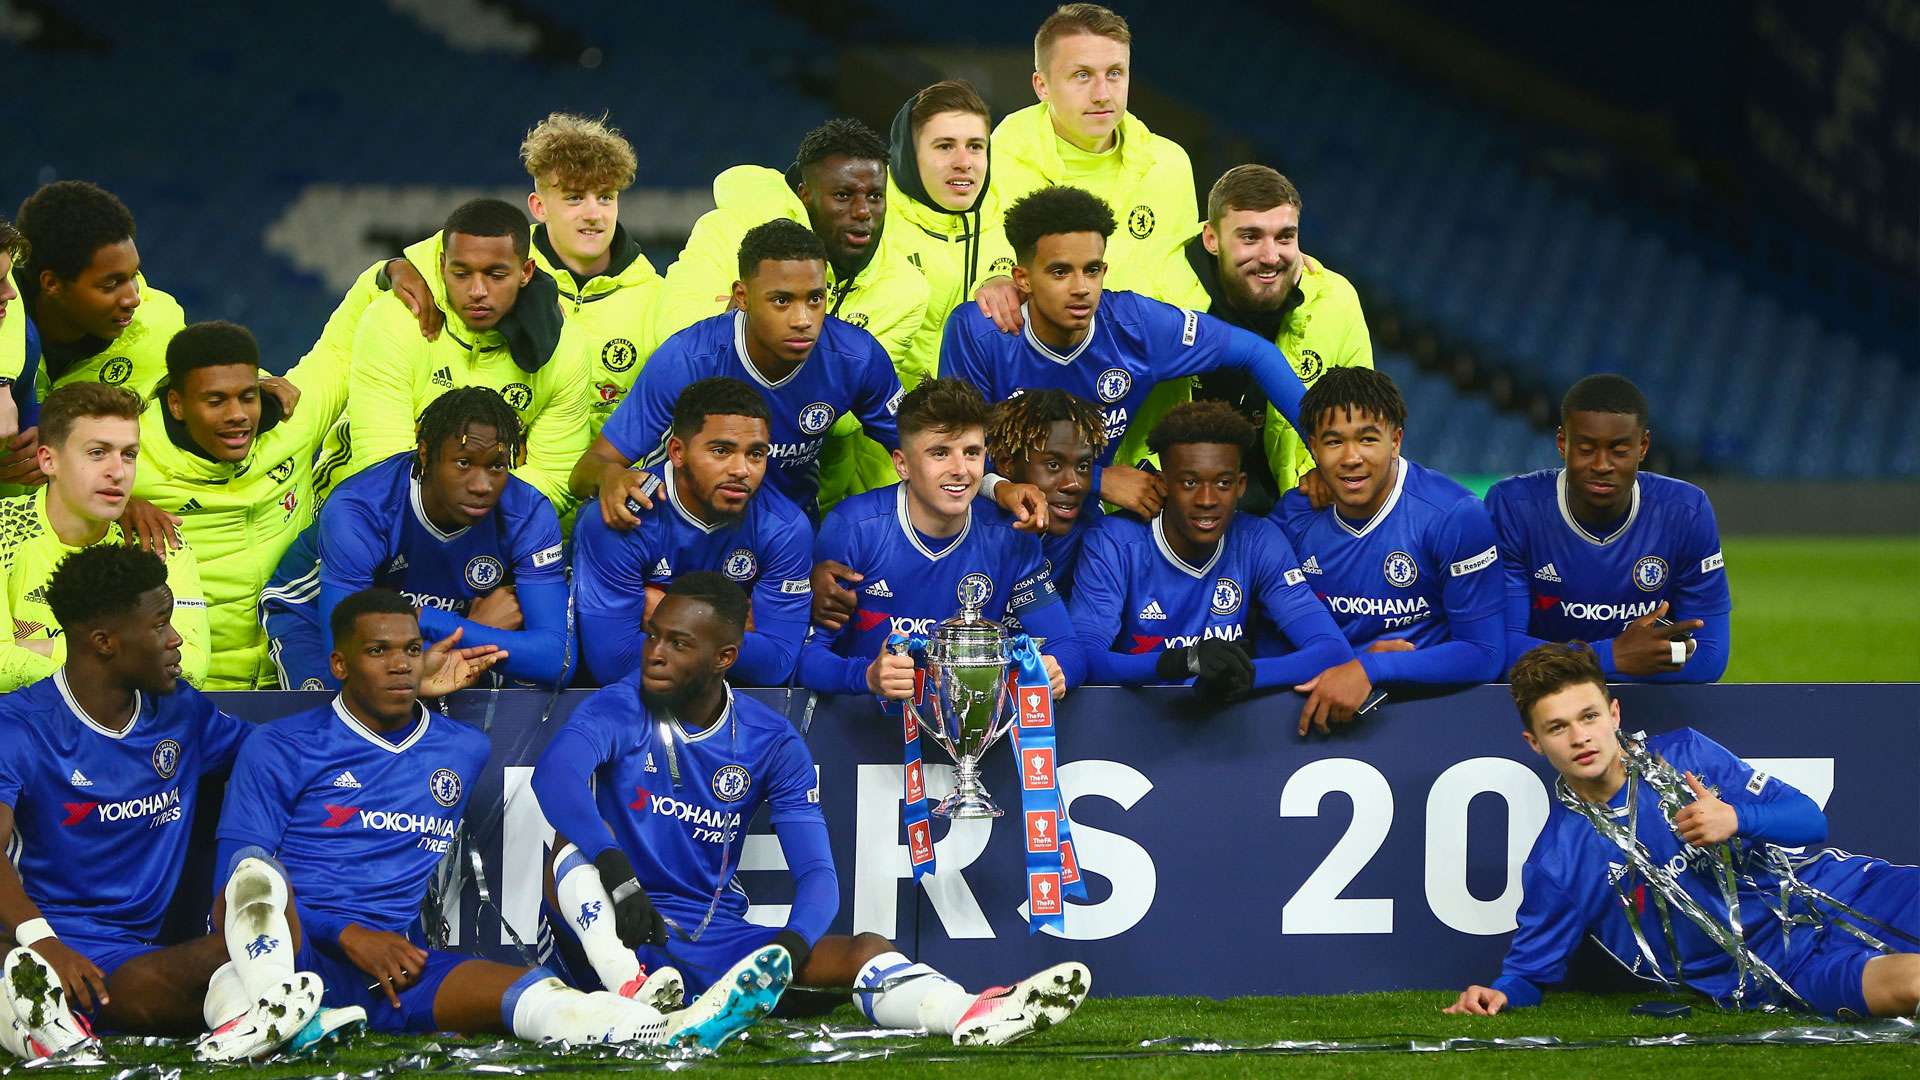 Chelsea Youth Cup